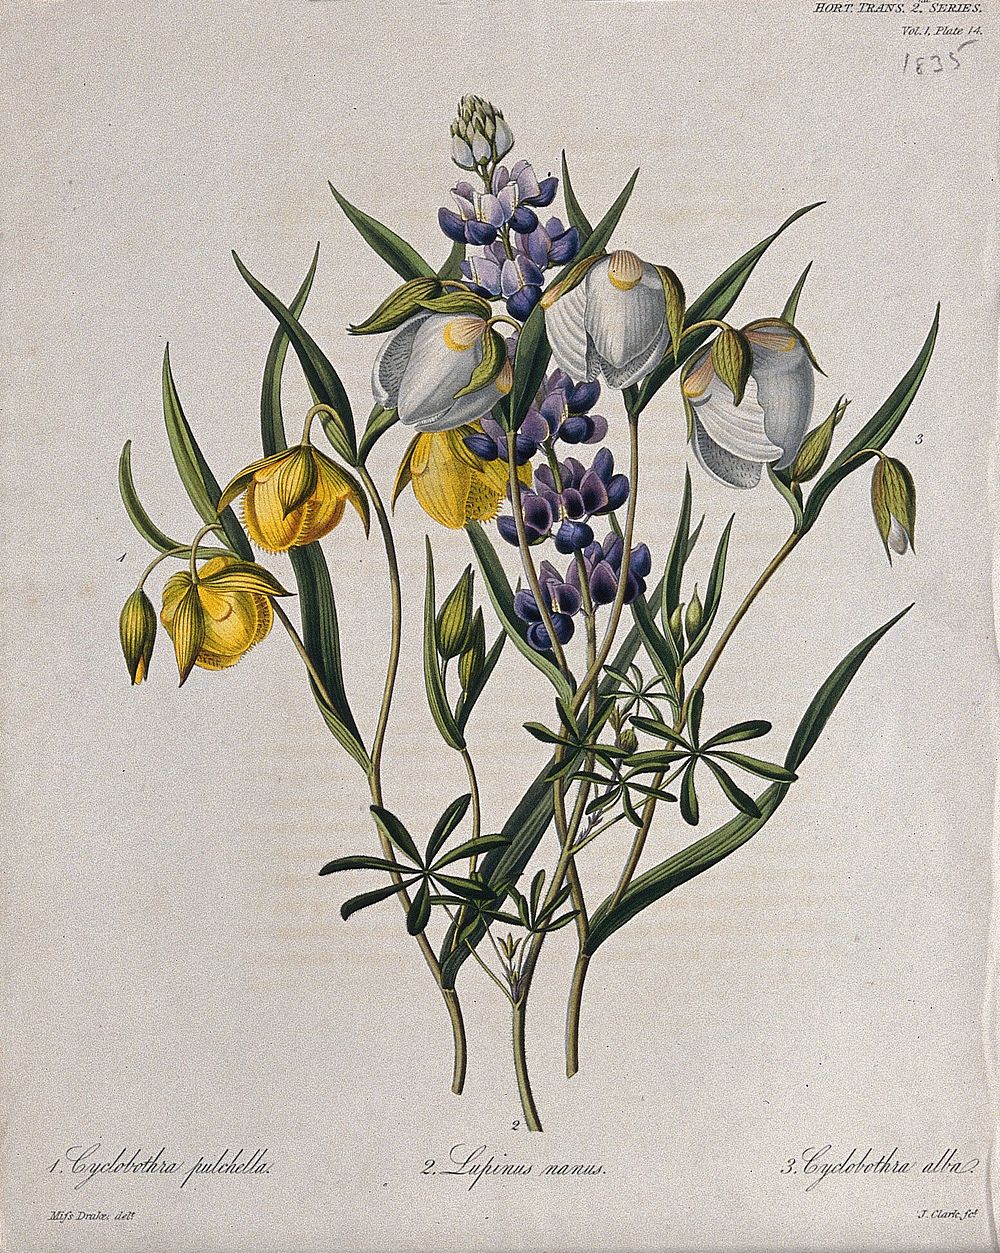 Three flowering plants: two mariposa lilies (Calochortus species) and a lupin (Lupinus nanus). Coloured etching by W. Clark…